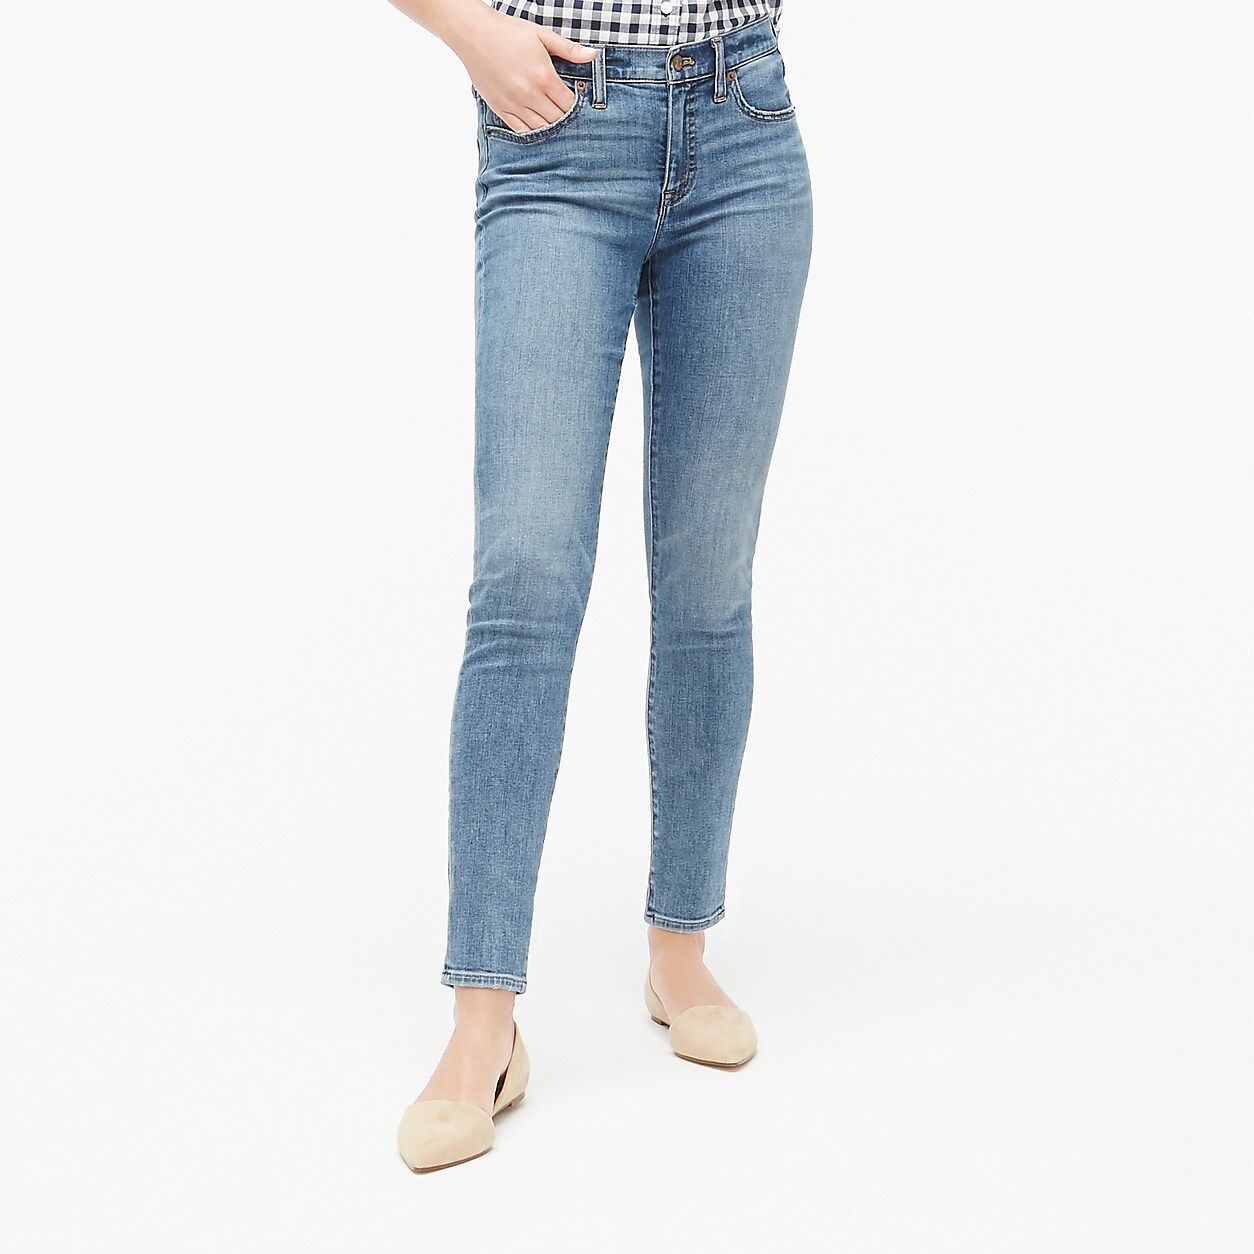 8" mid-rise skinny jean in authentic blue wash | J.Crew Factory